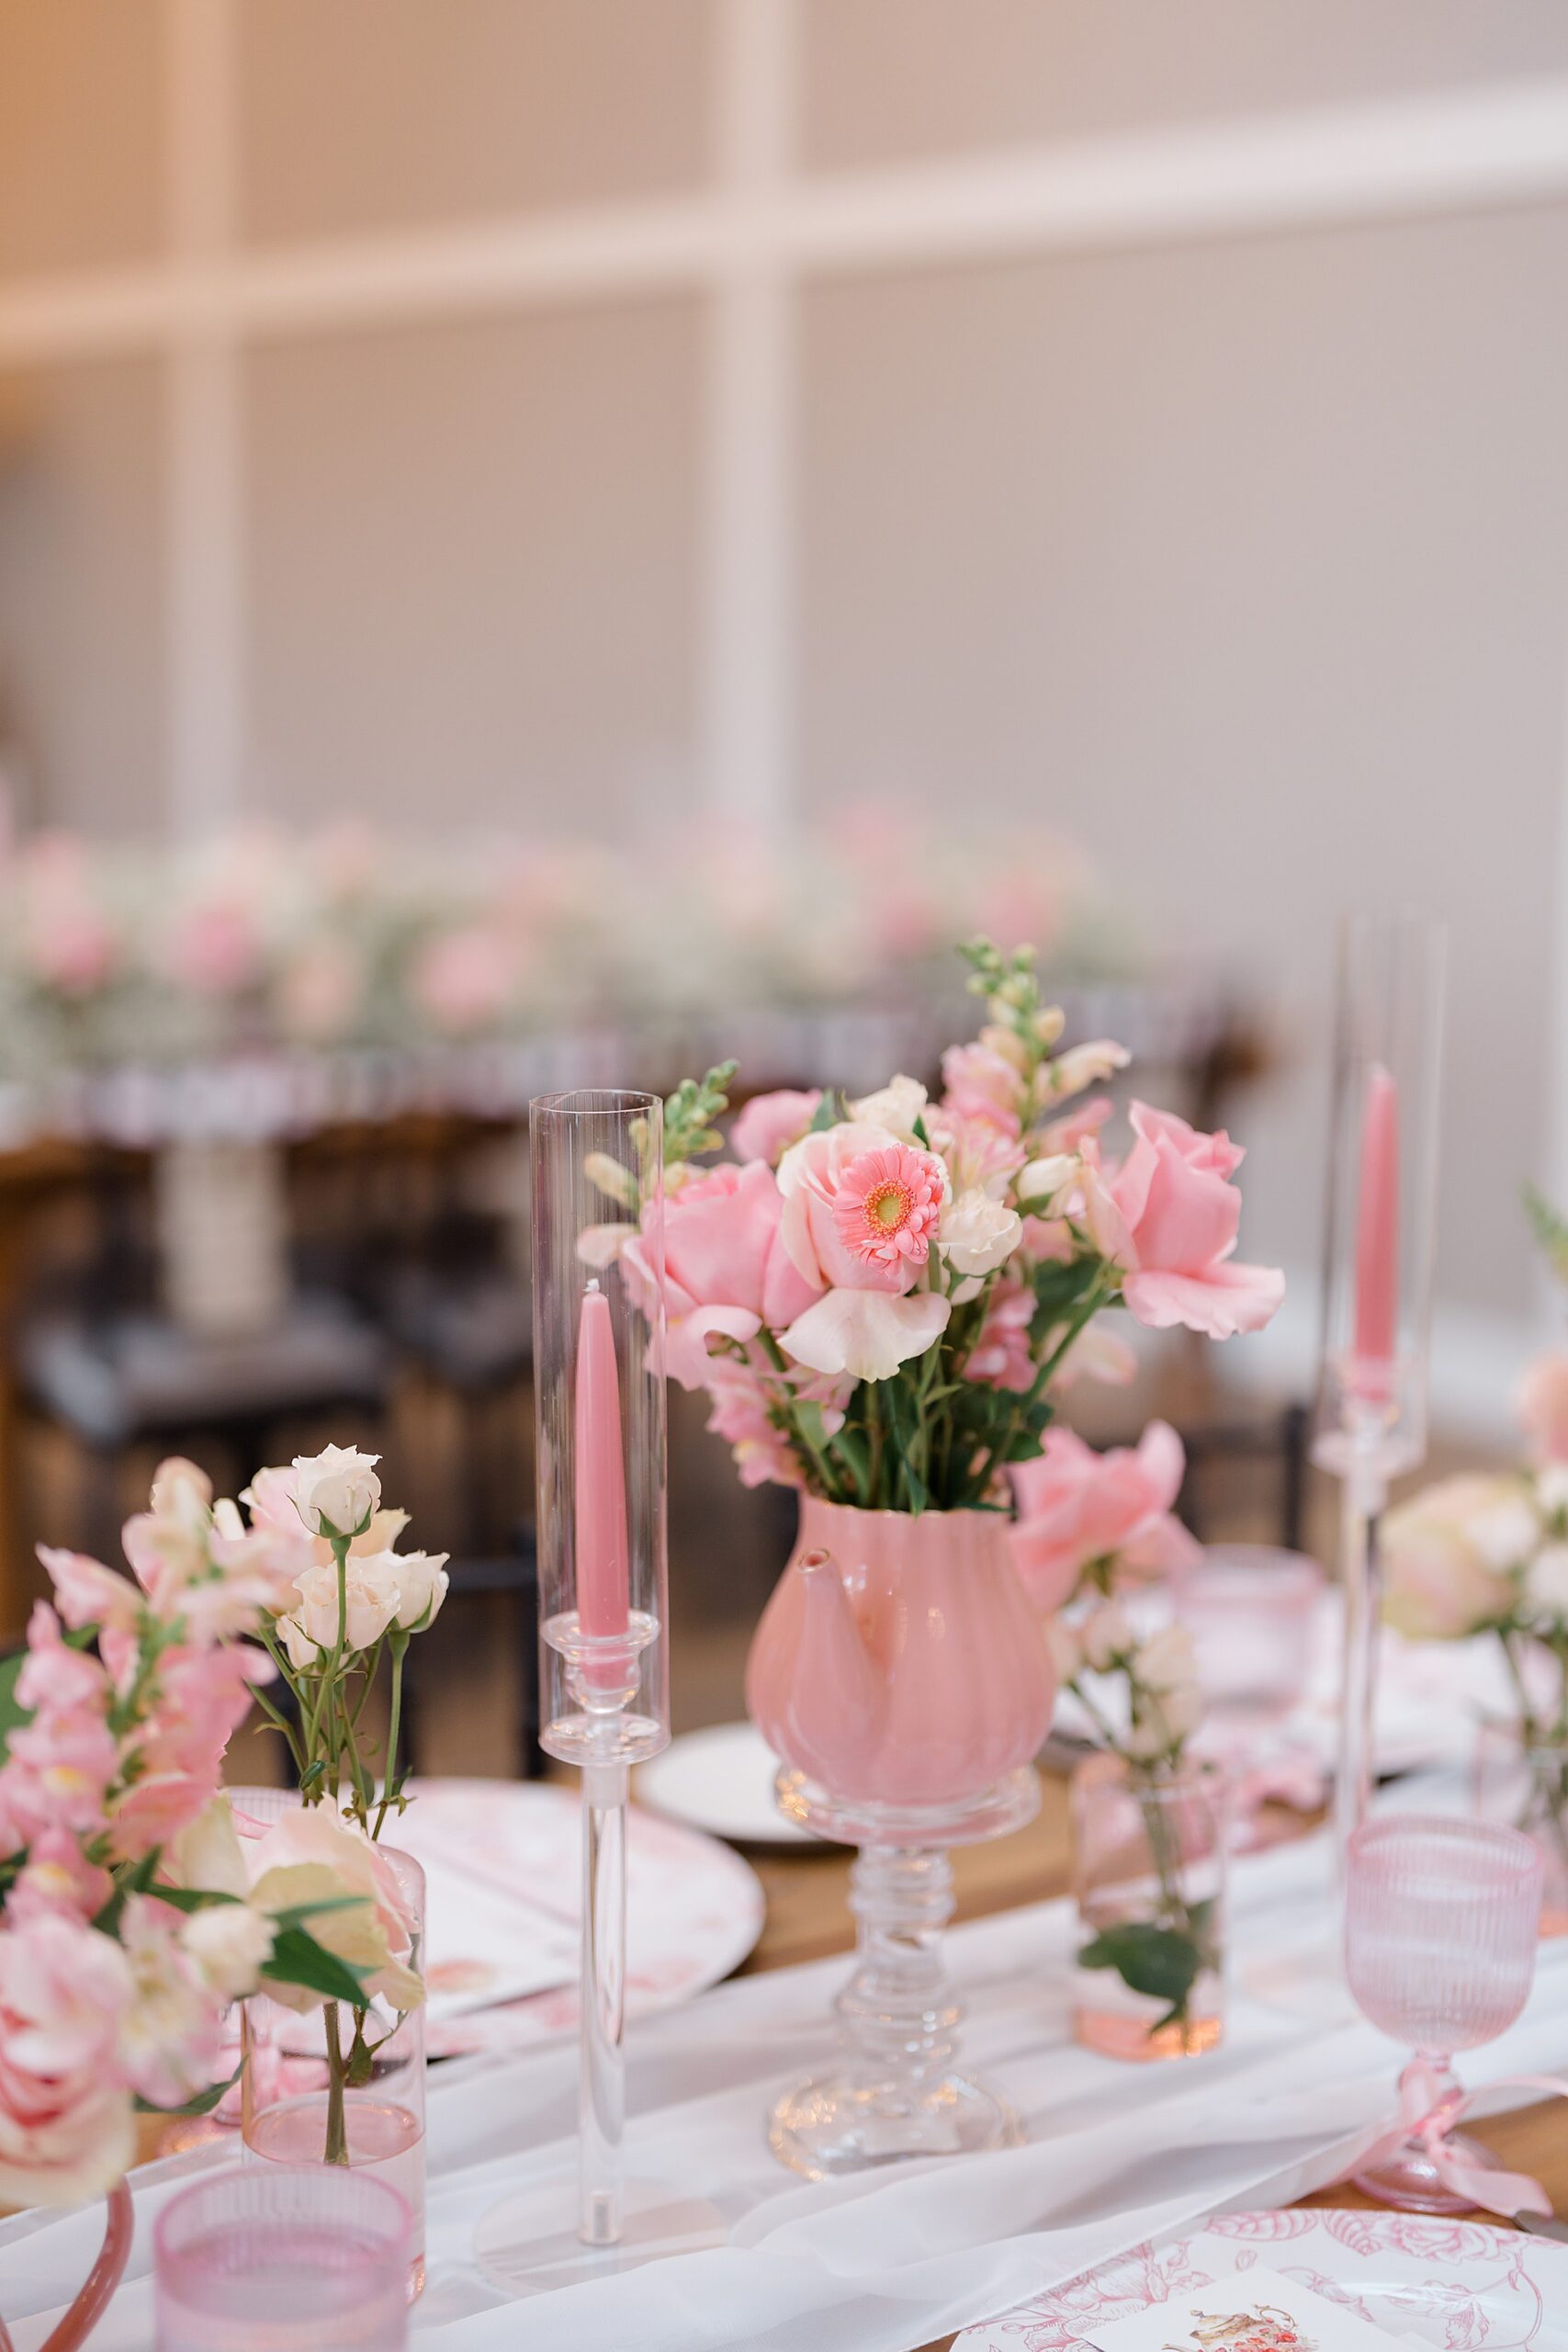 Tea Party Bridal Shower details with pink flowers in teapot vases